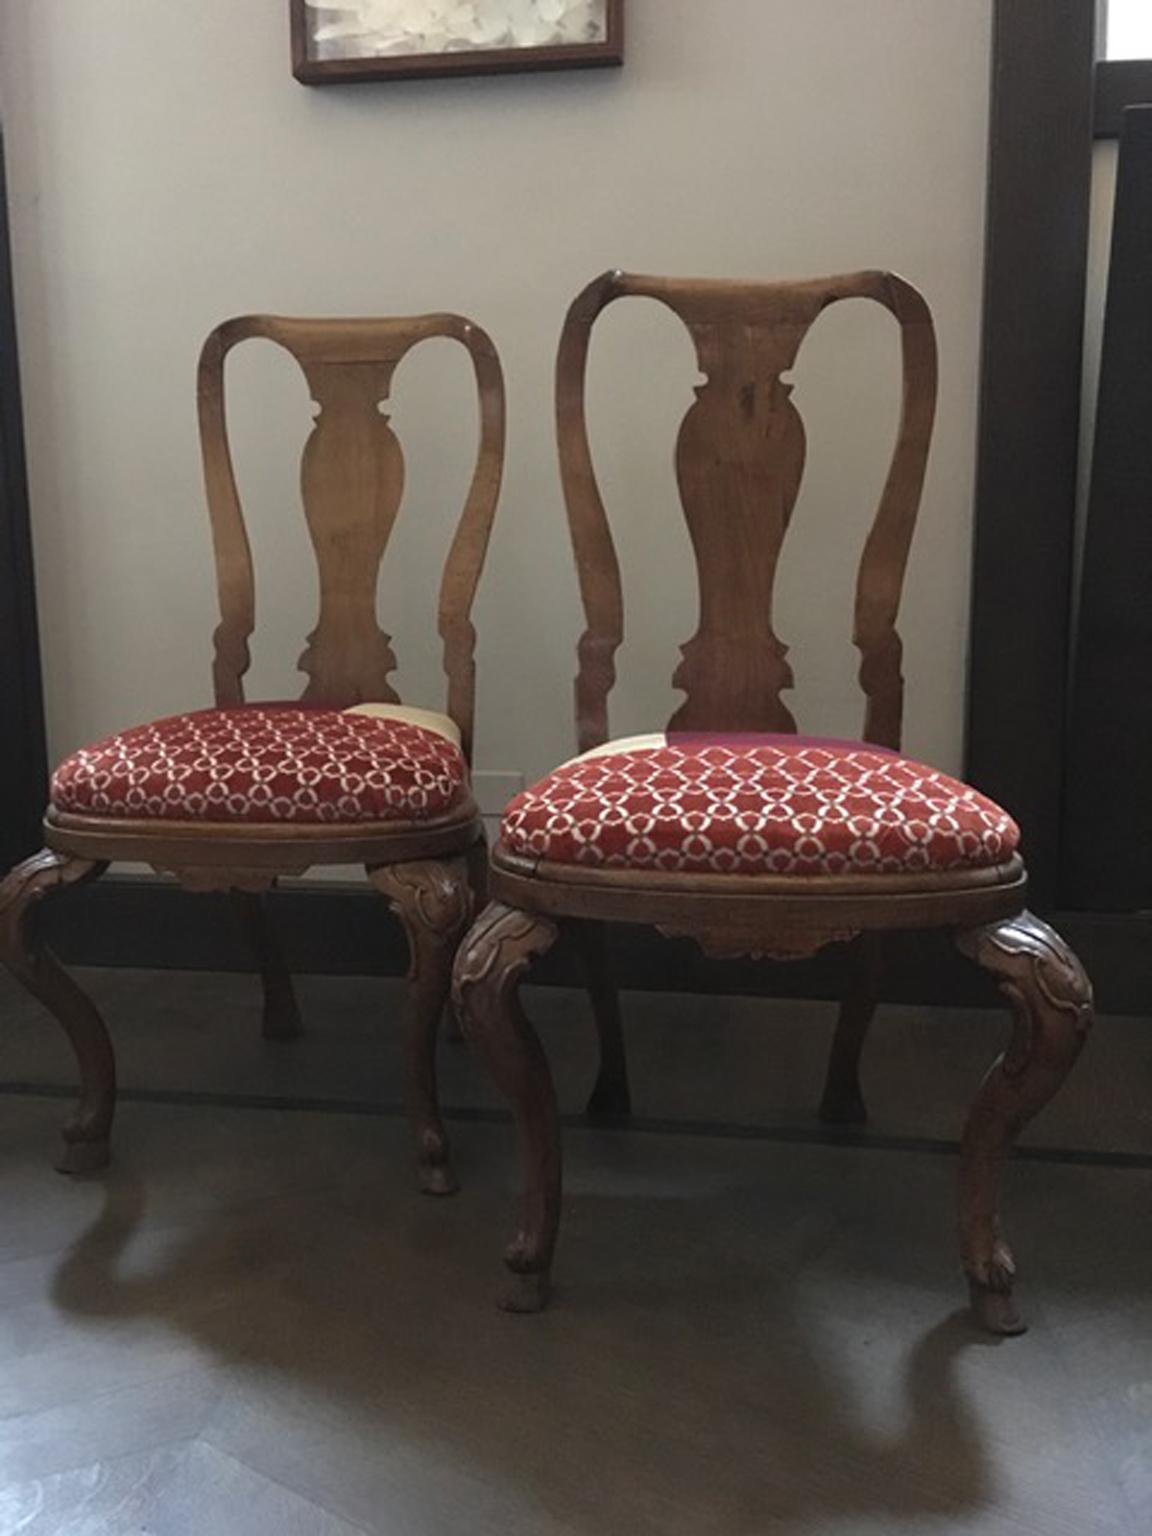 This is a very beautiful set of six elegant dining chairs hand carved in solid oak.
Their shapes are gorgeous and the proportion makes them an important presence in a dining room. Deeply engraved the legs are a little masterpiece of